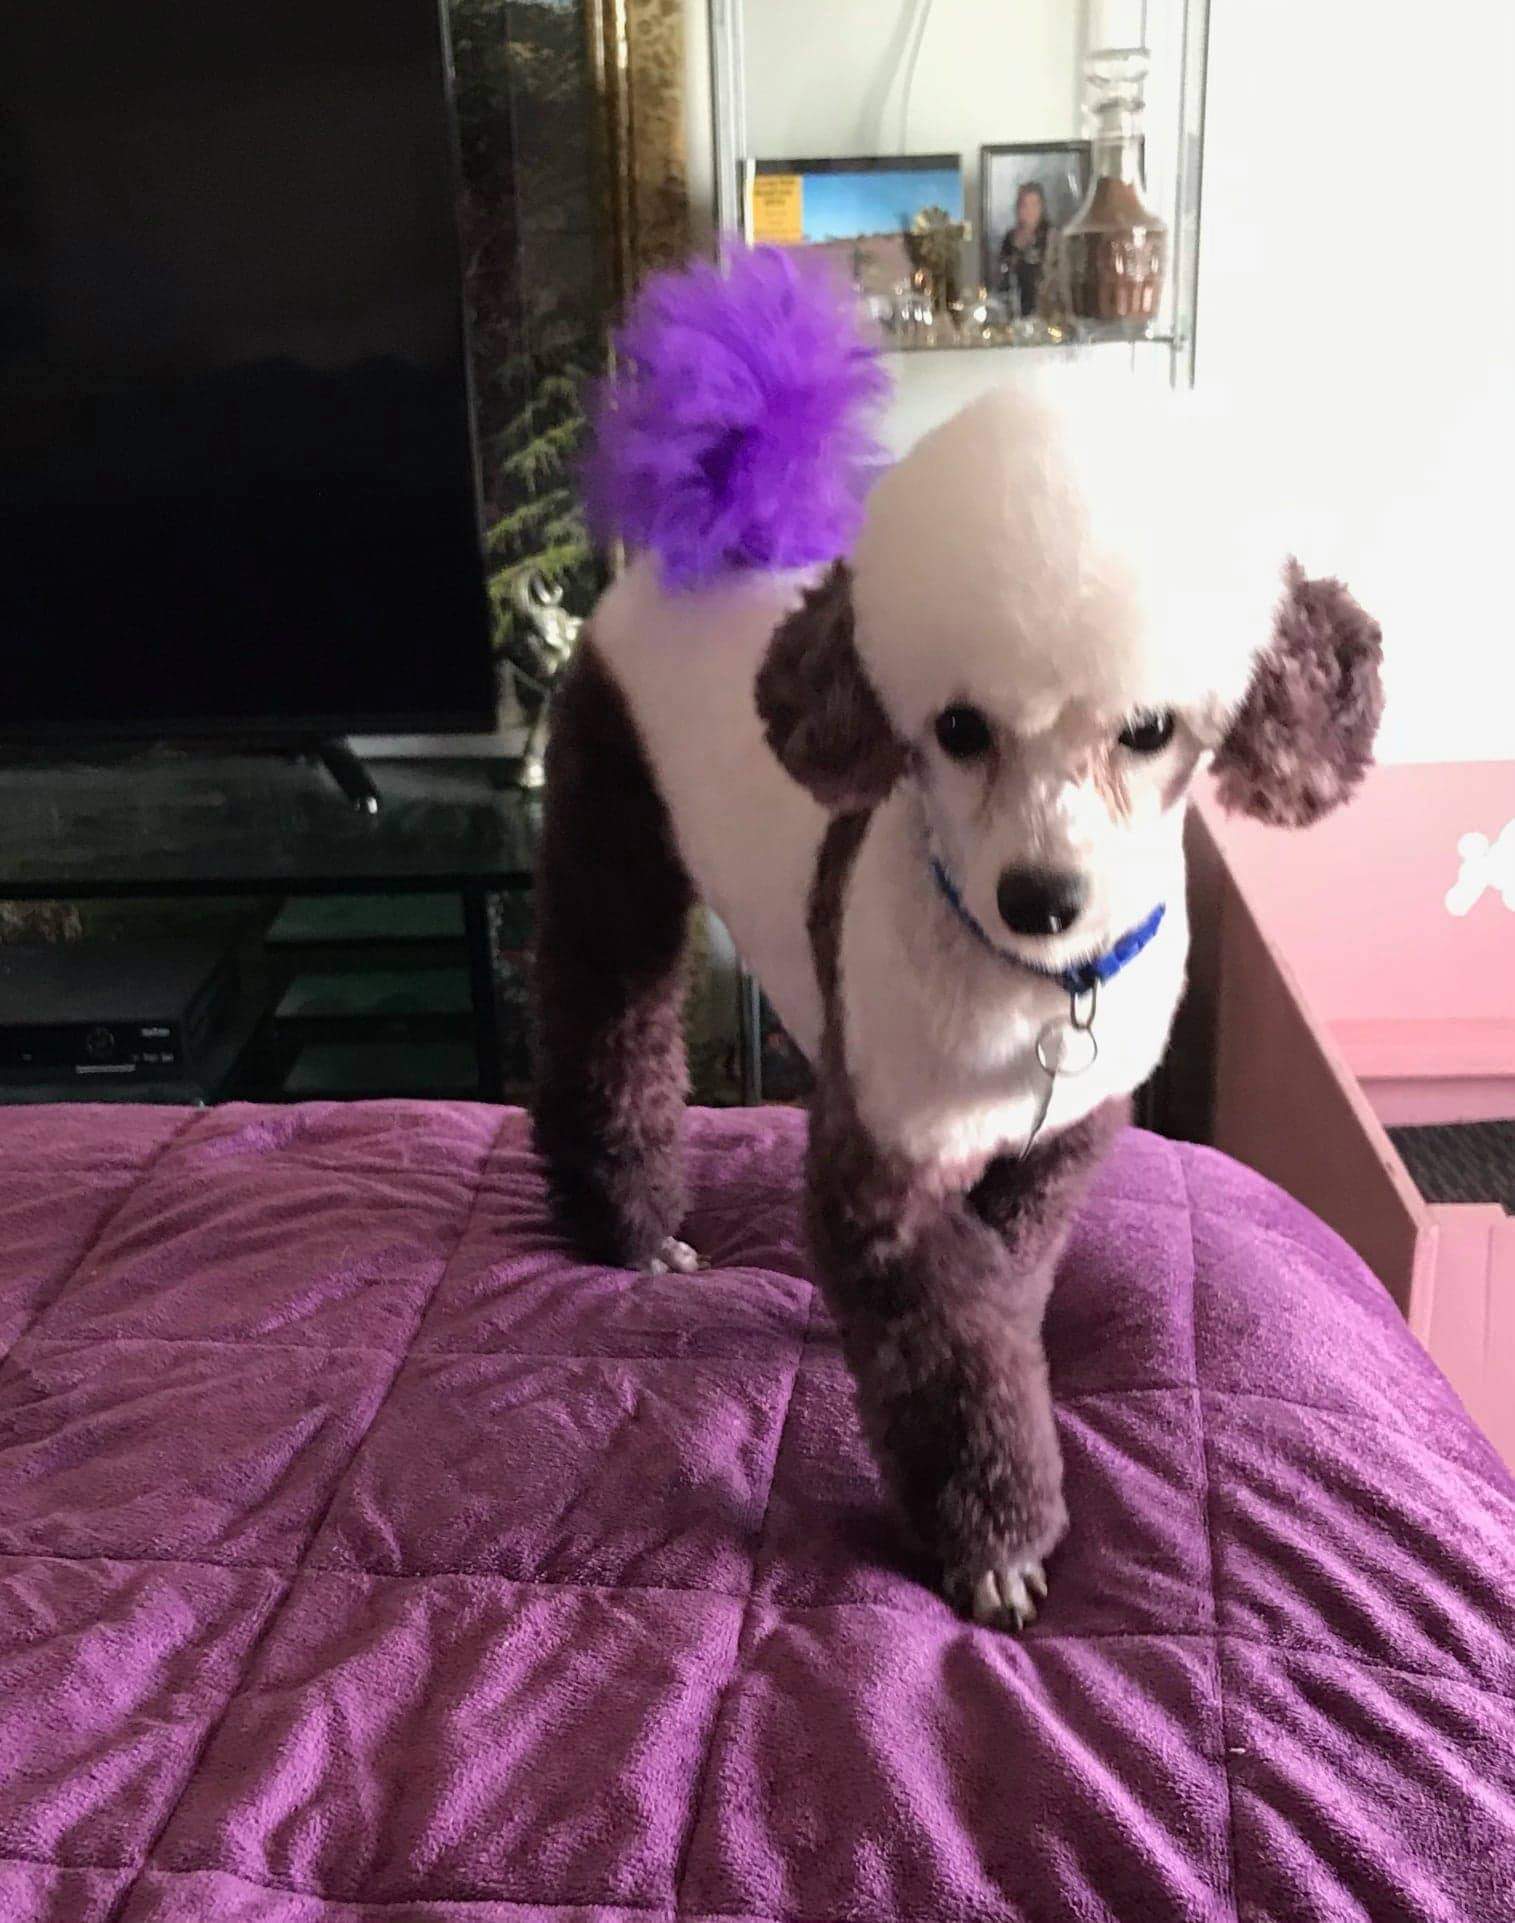 Toy poodle purebred baby boy